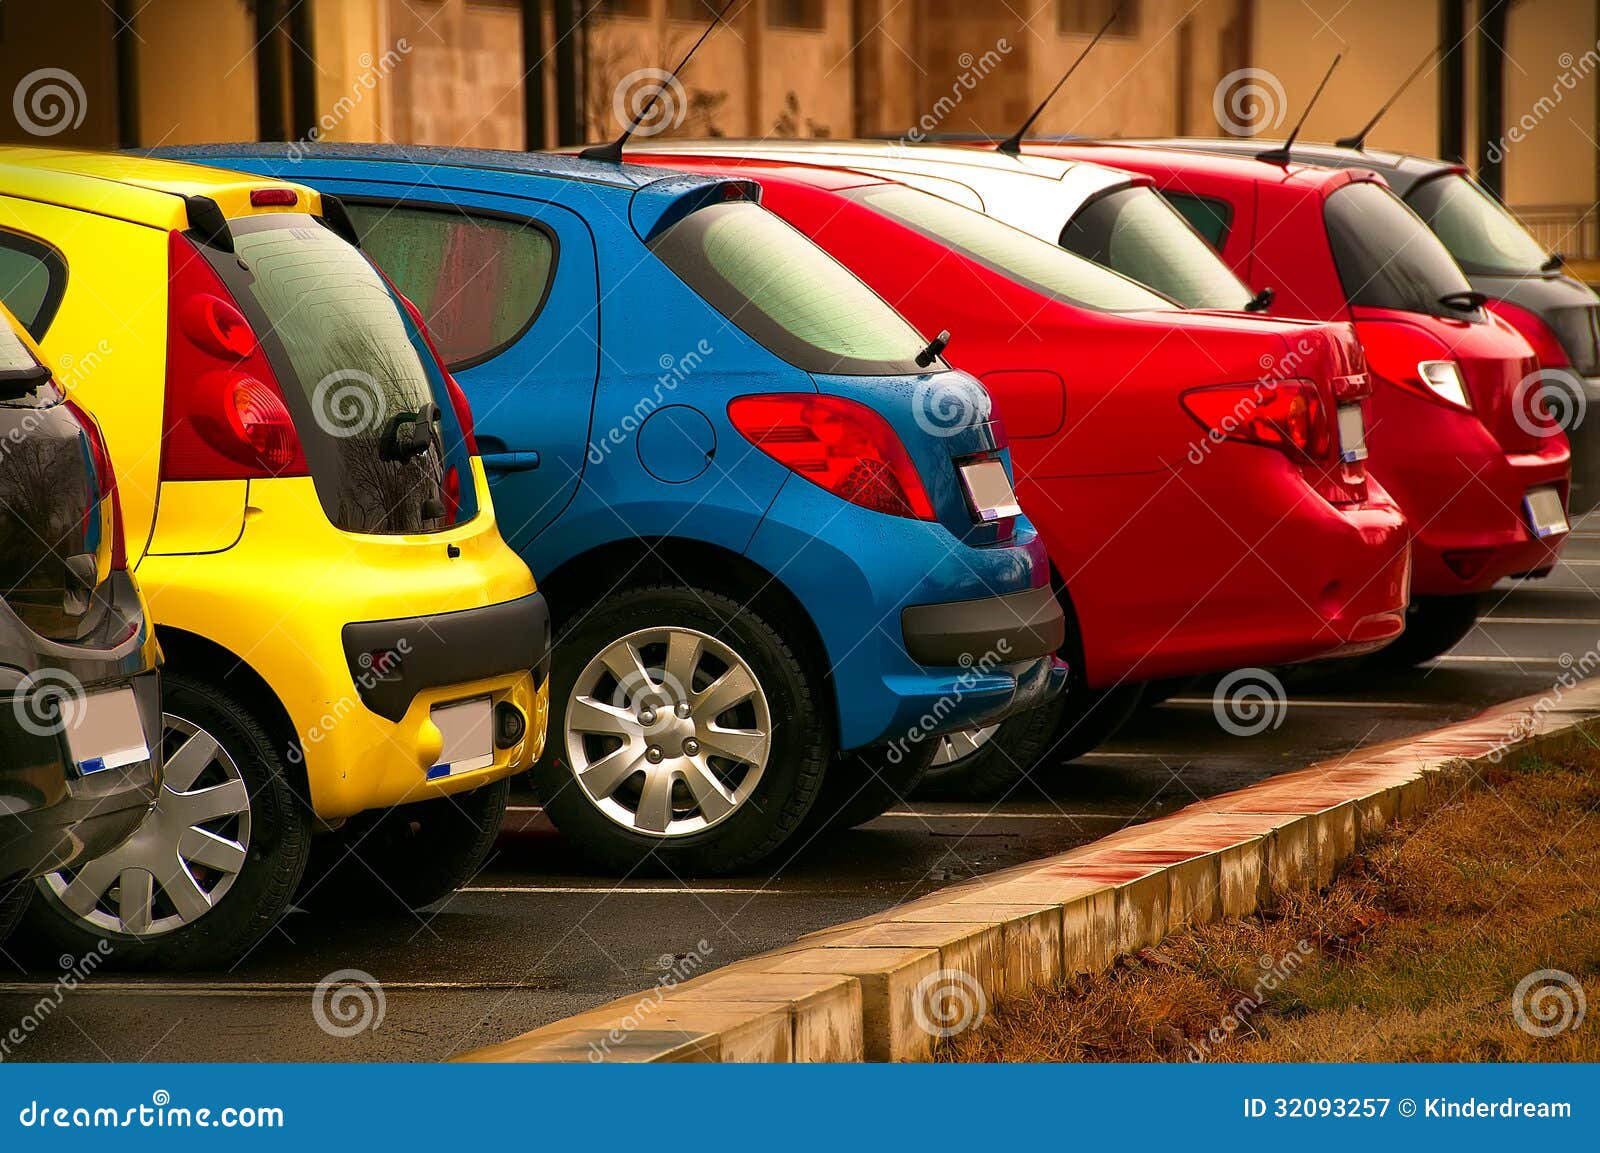 automobiles of different colors